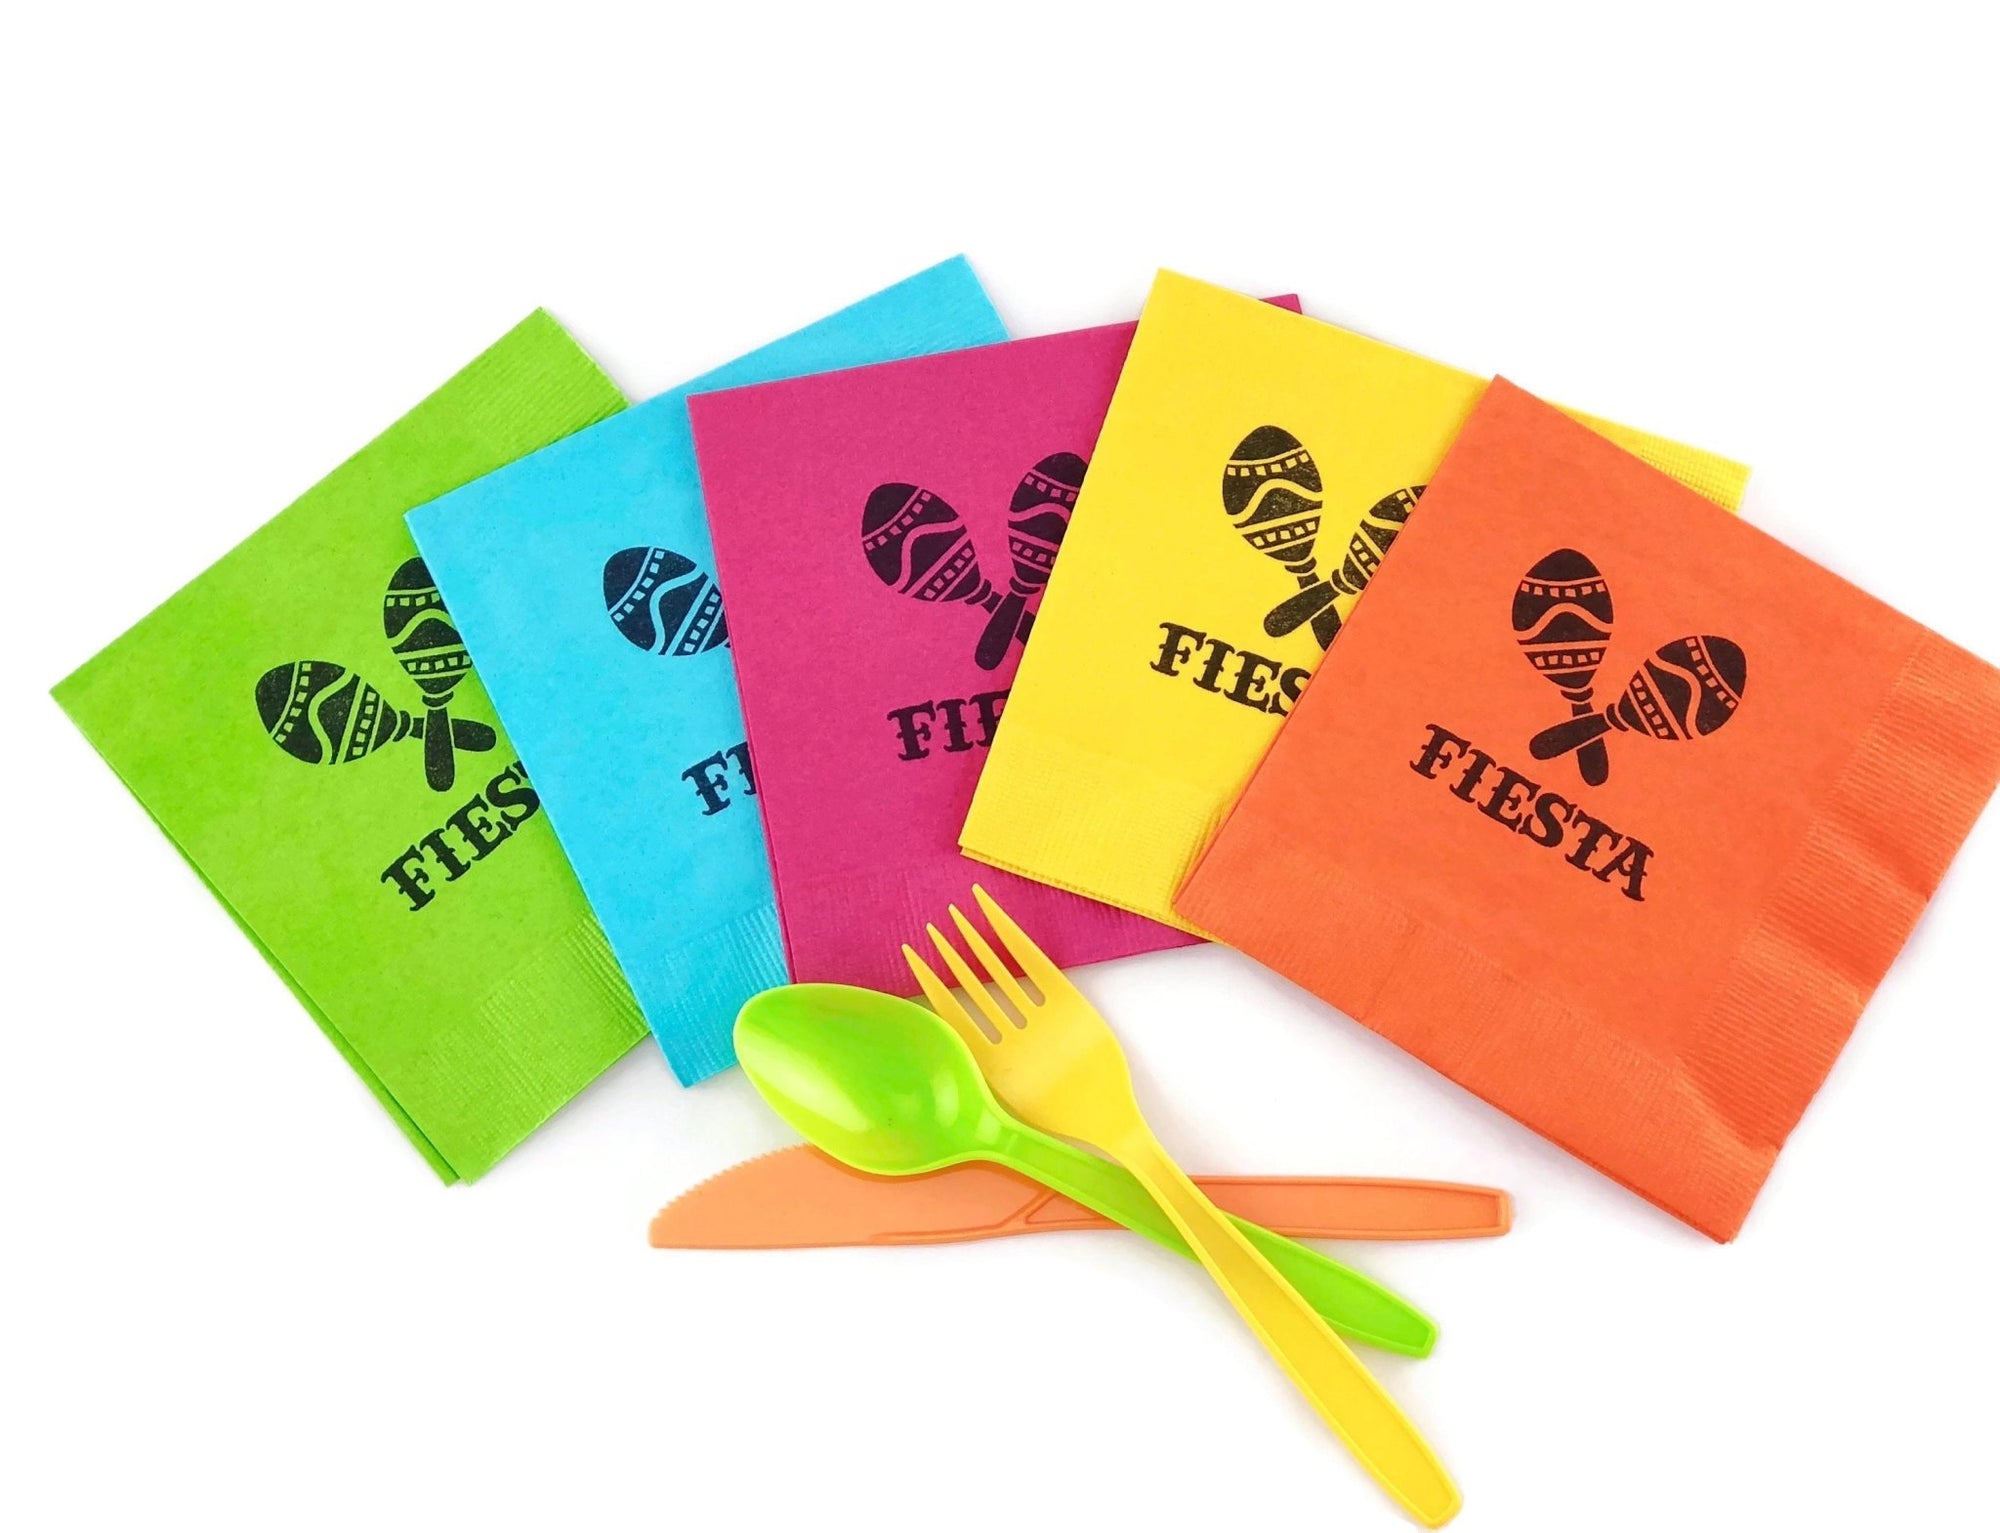 "Fiesta" Colorful Party Napkins - Stesha Party